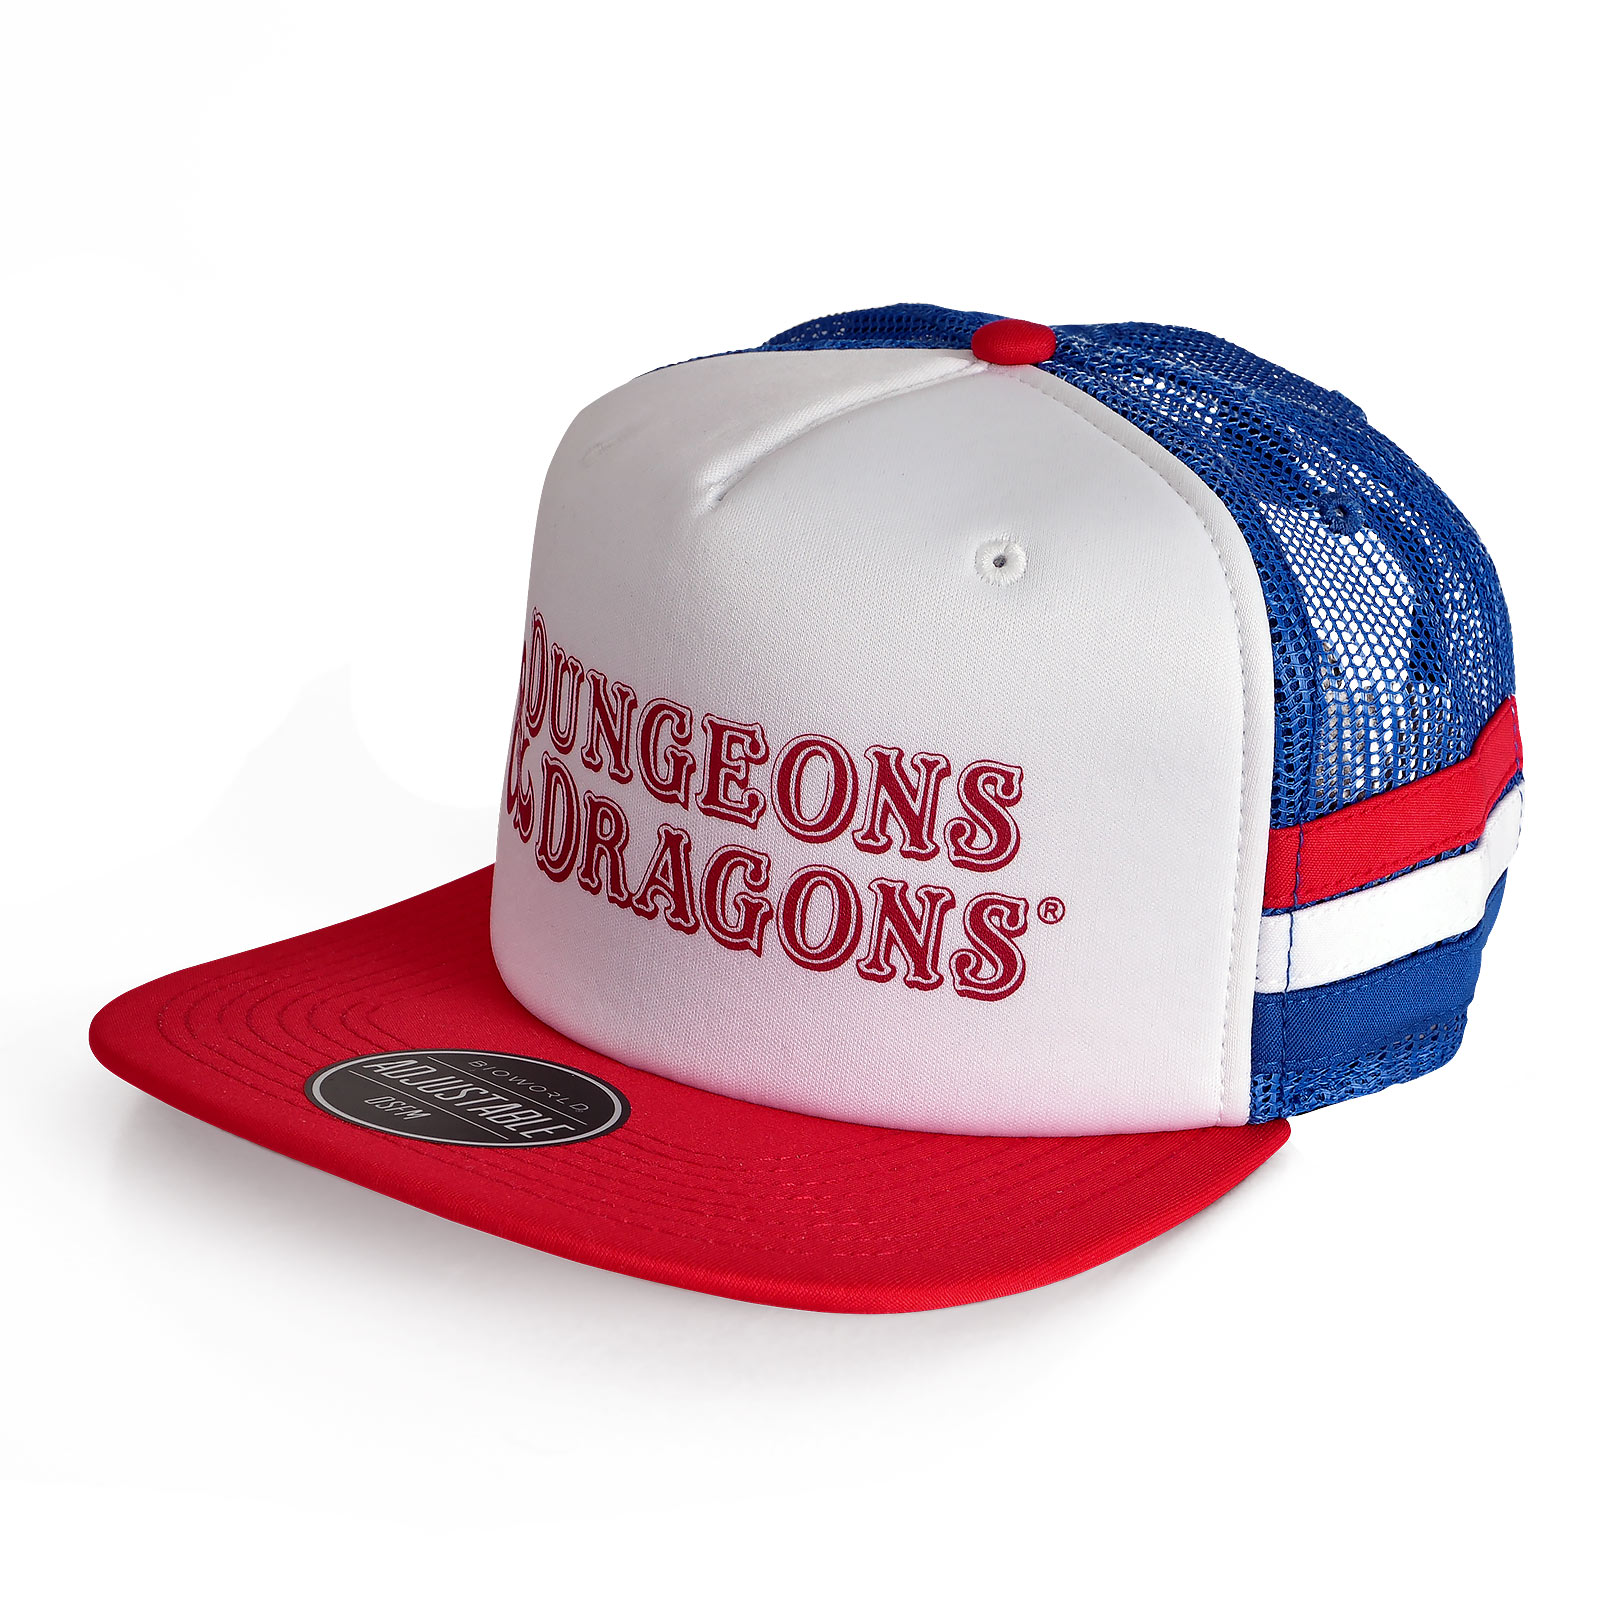 Dungeons & Dragons - Casquette Snapback Logo